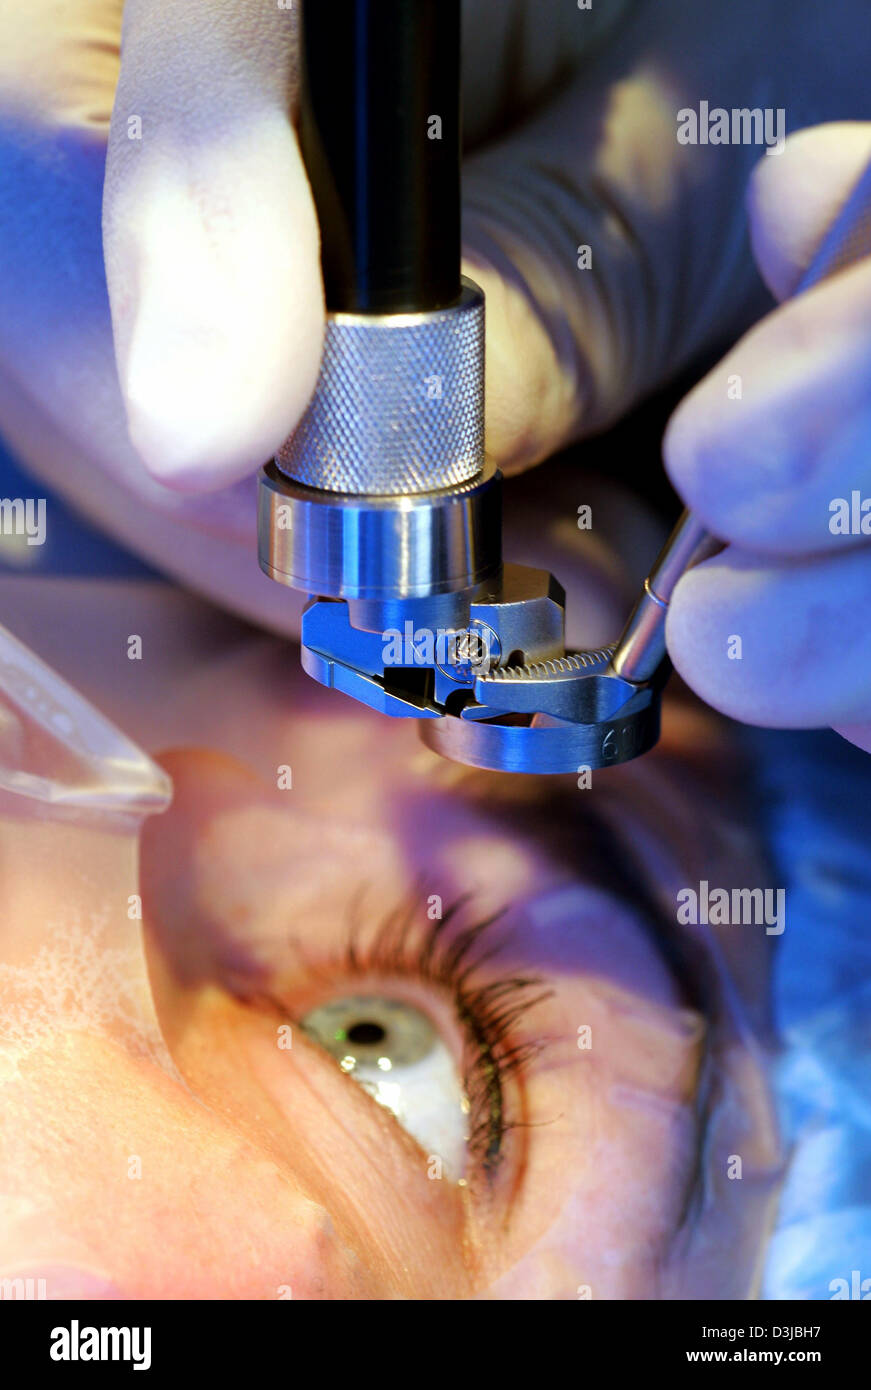 (dpa) - A precision plane is being positioned above the eye of a patient for a LASIK eye surgery at the Hohenzollernklinik - Centre for refractive surgery in Muenster, Germany, 27 January 2005. LASIK stands for 'Laser-Assisted In Situ Keratomileusis' and refers to a surgical procedure on the eye with an excimer laser intended to reduce a person's dependency on glasses or contact le Stock Photo